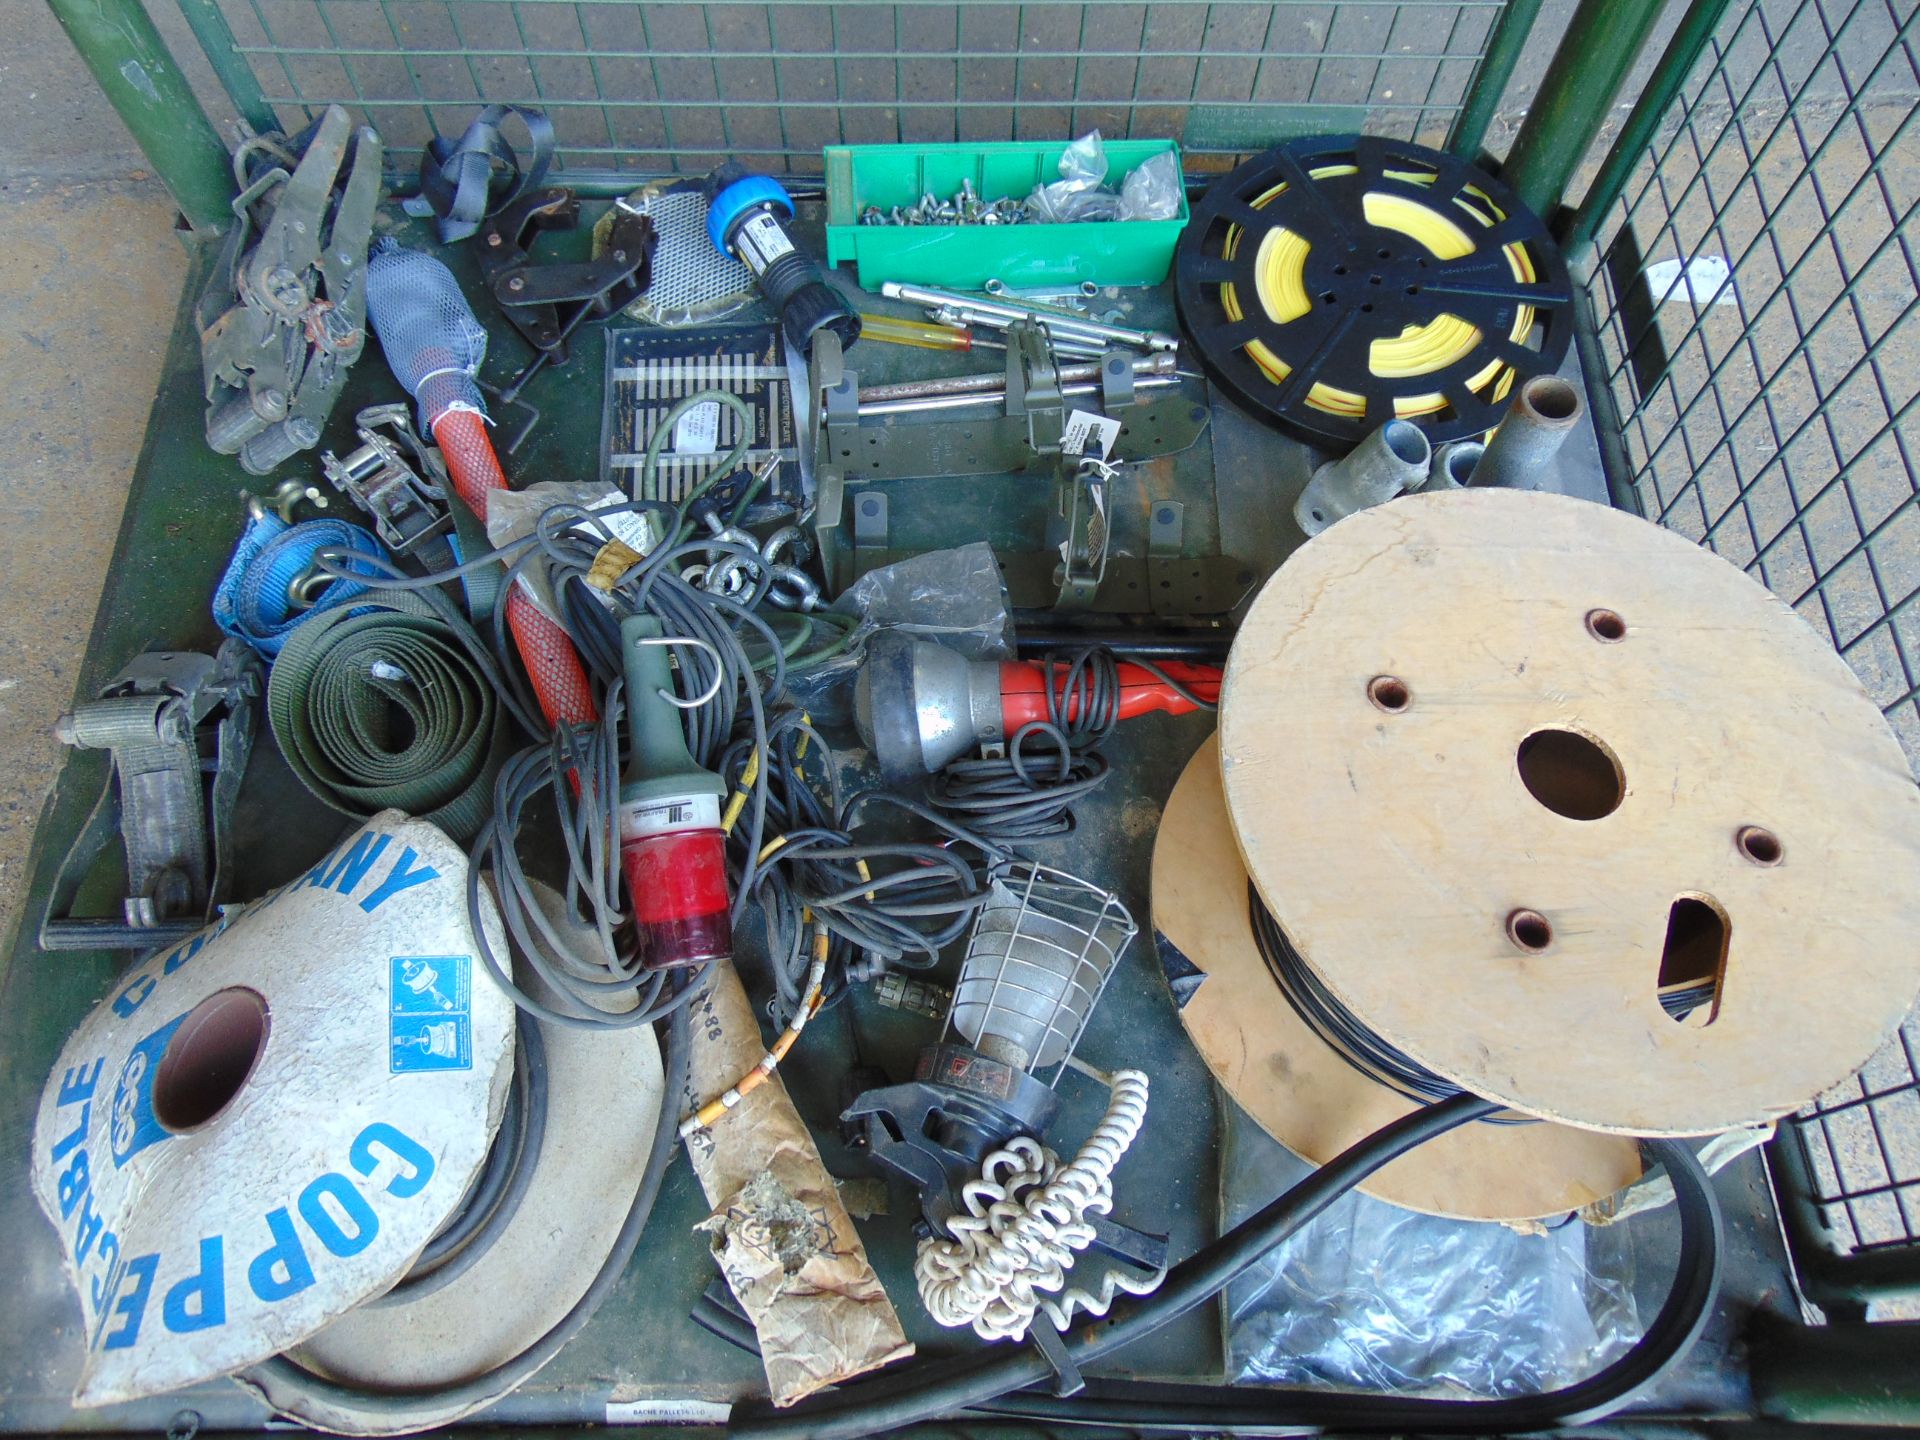 1 x Stillage Cable, Inspection Lamps, Ratchet Straps, Tools, Antenna Bases etc - Image 8 of 8